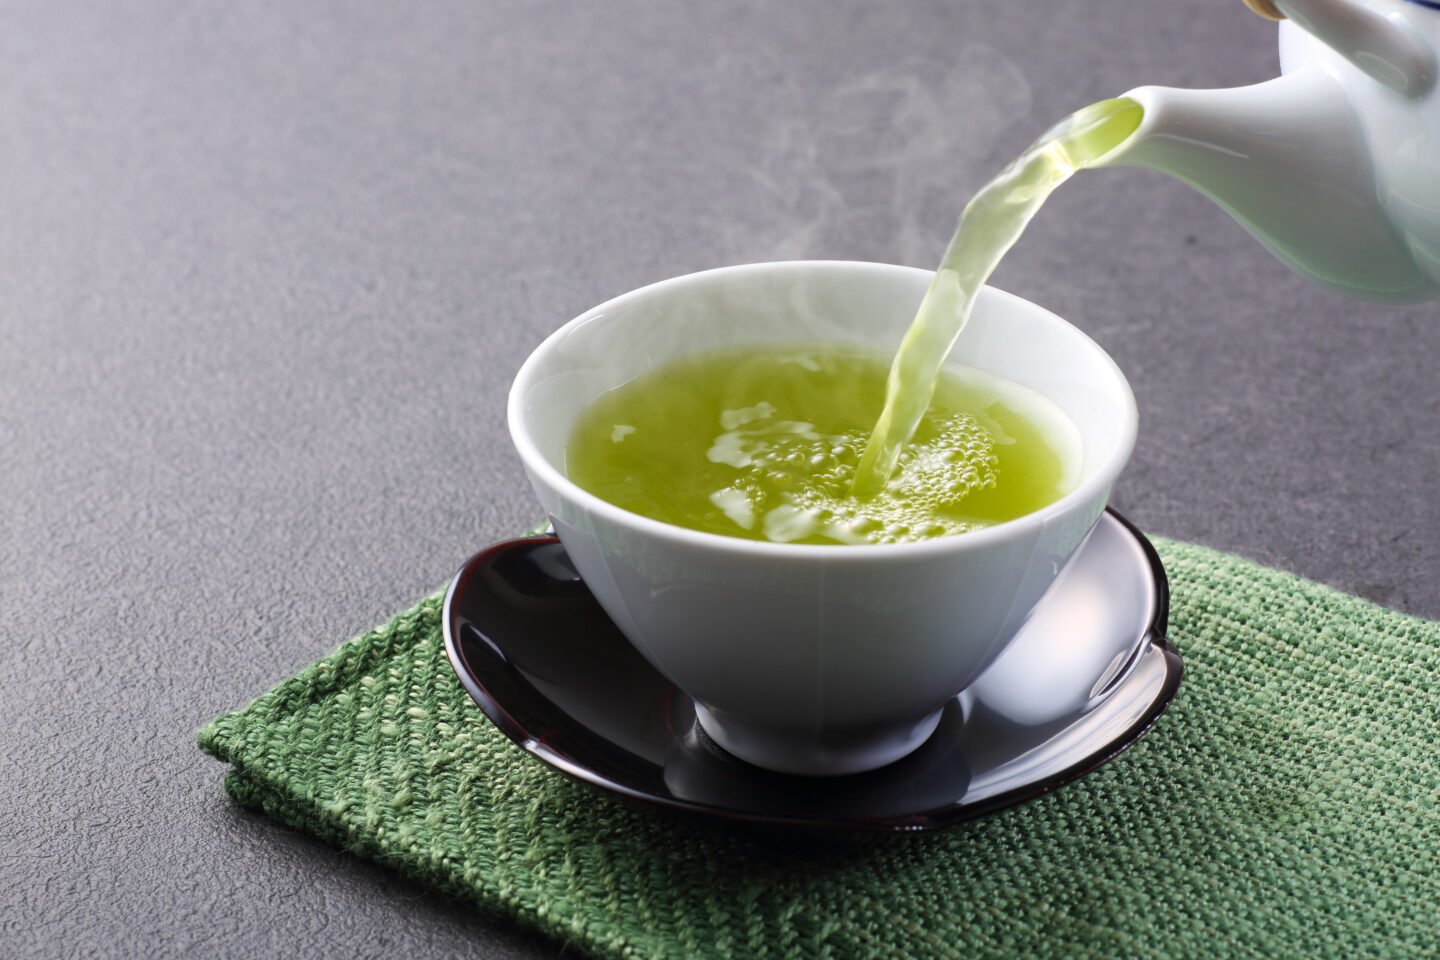 Green tea is poured into a white tea cup